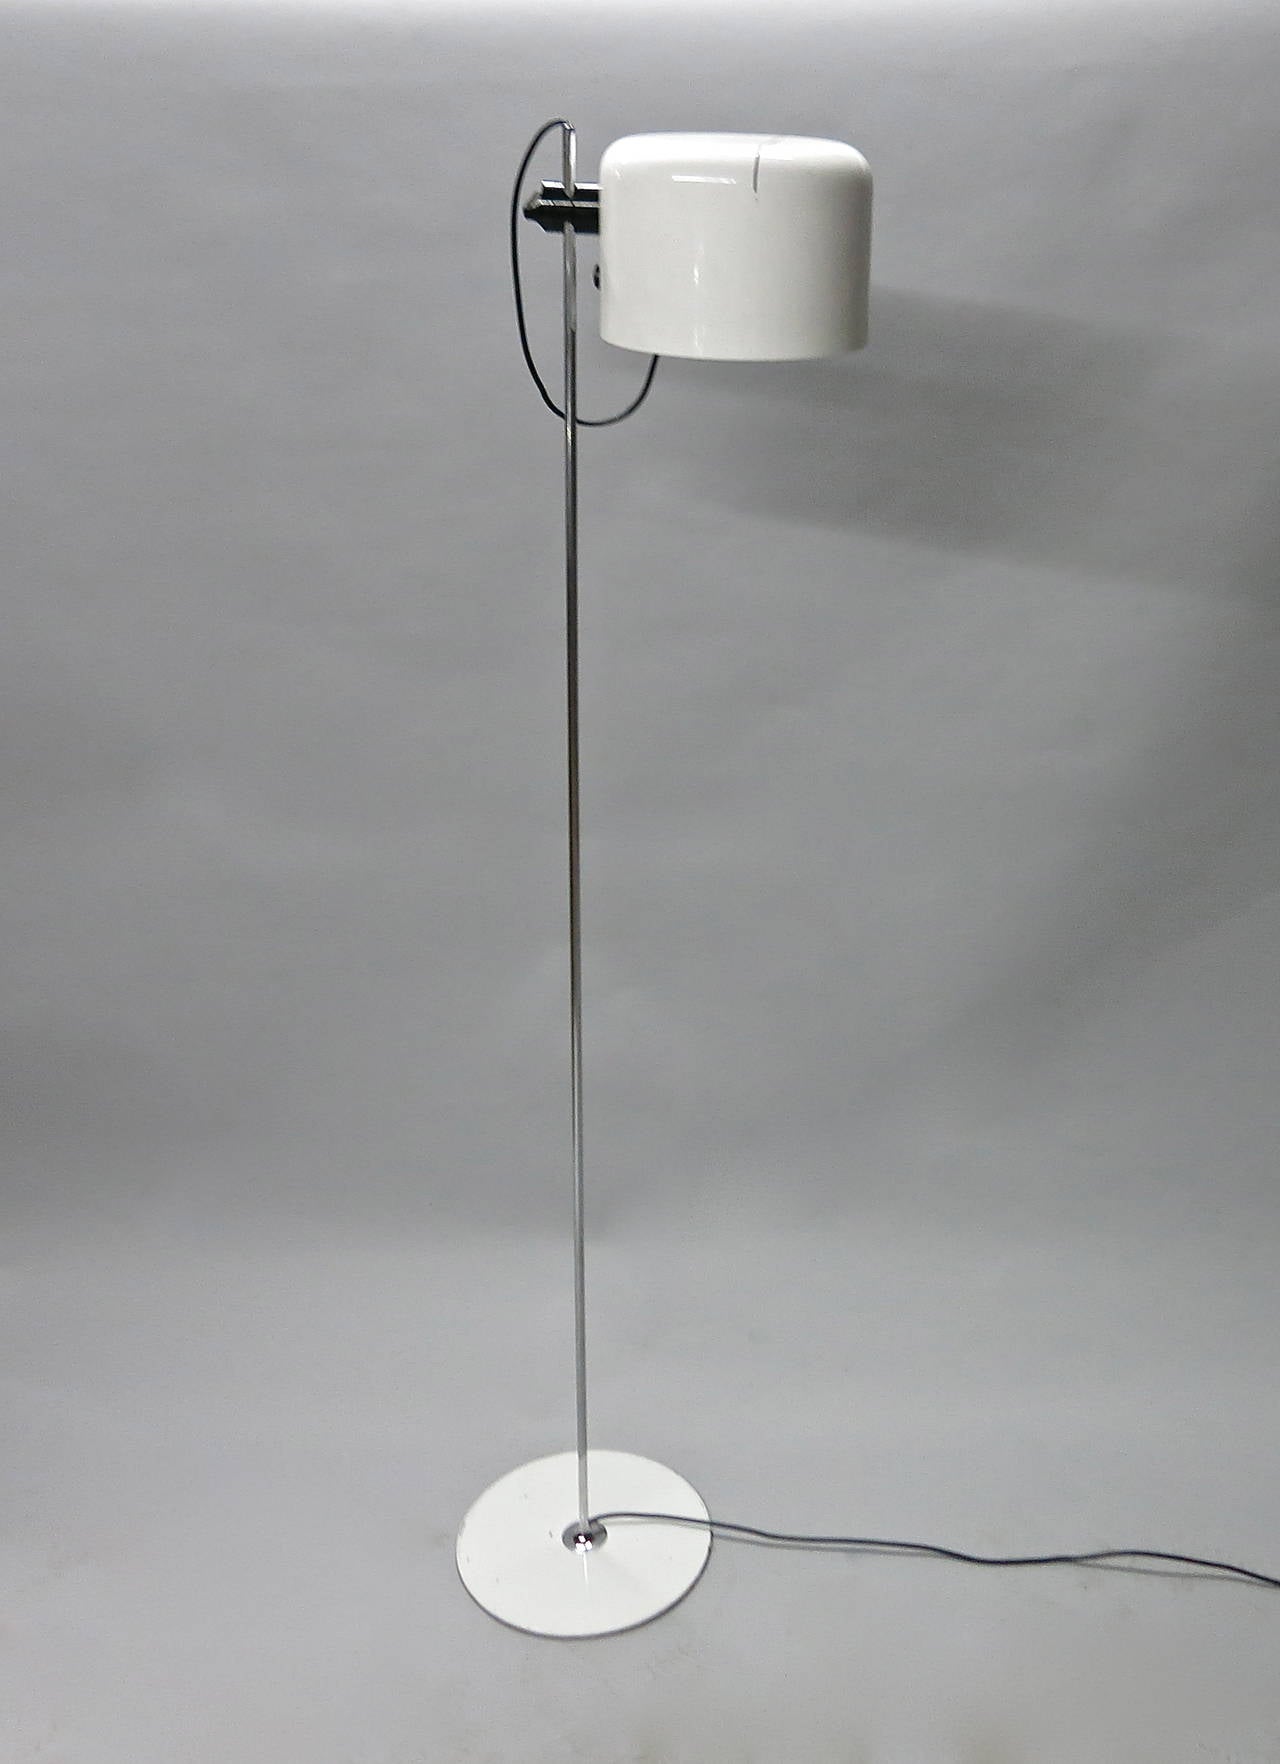 Vintage Coupe Floor Lamp in white enameled steel and chrome. Lamp has an adjustable shade that slides up, down and rotates. The shade is attached to  tubular chrome rod and supported by a round weighted steel base.
Image #6 shows the original